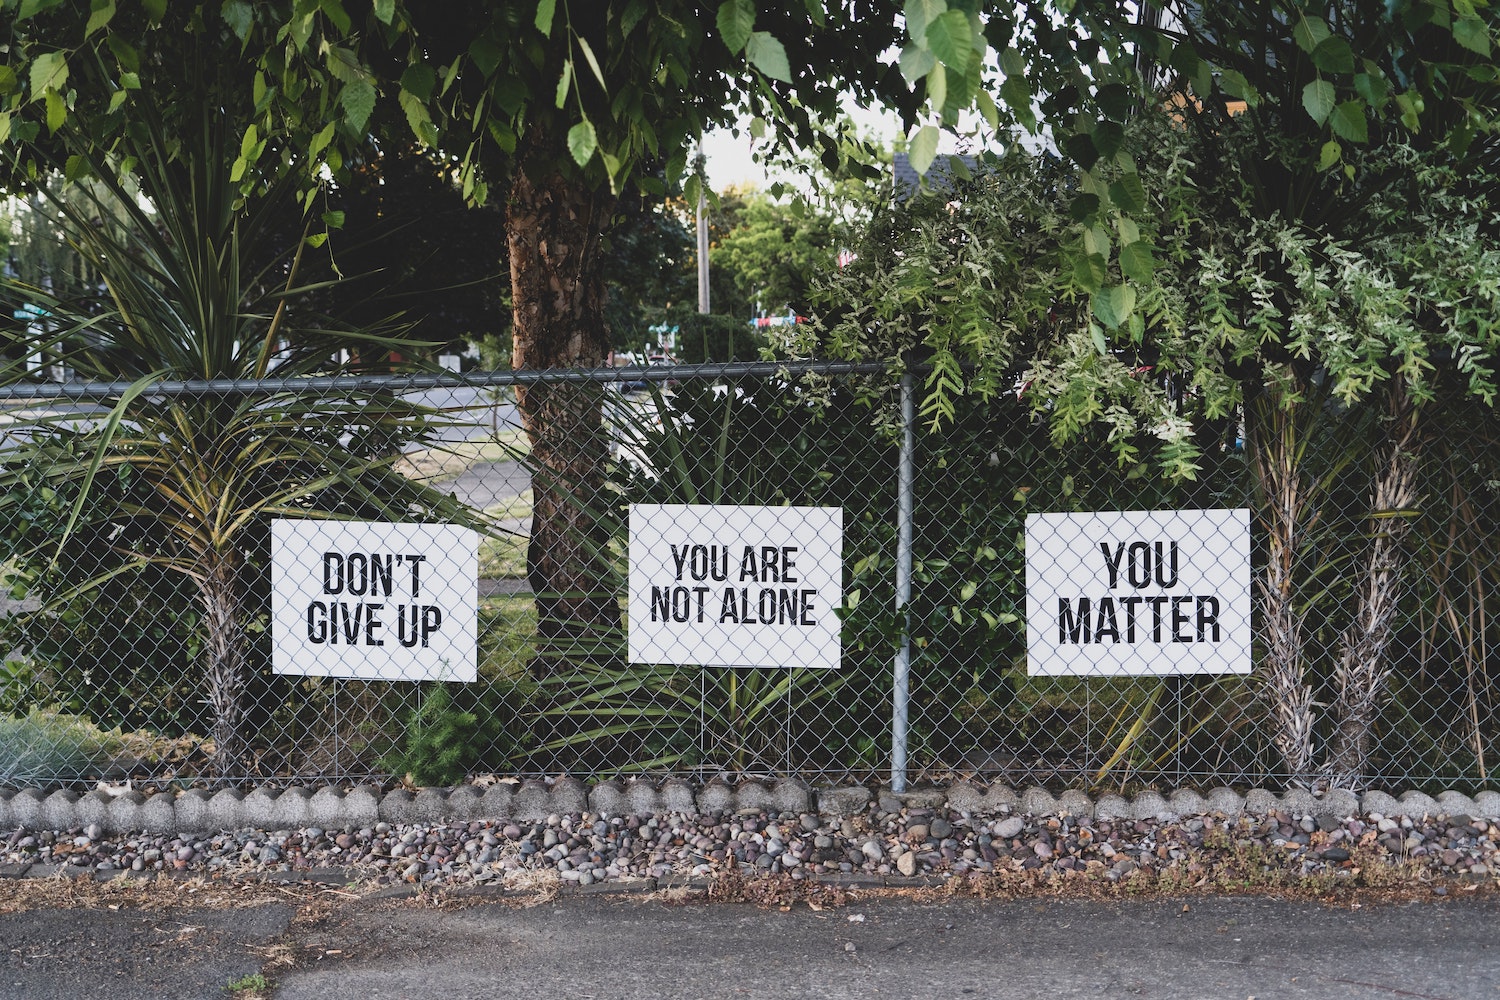 fence with signs saying "don't give up", "you matter" and "you're not alone"